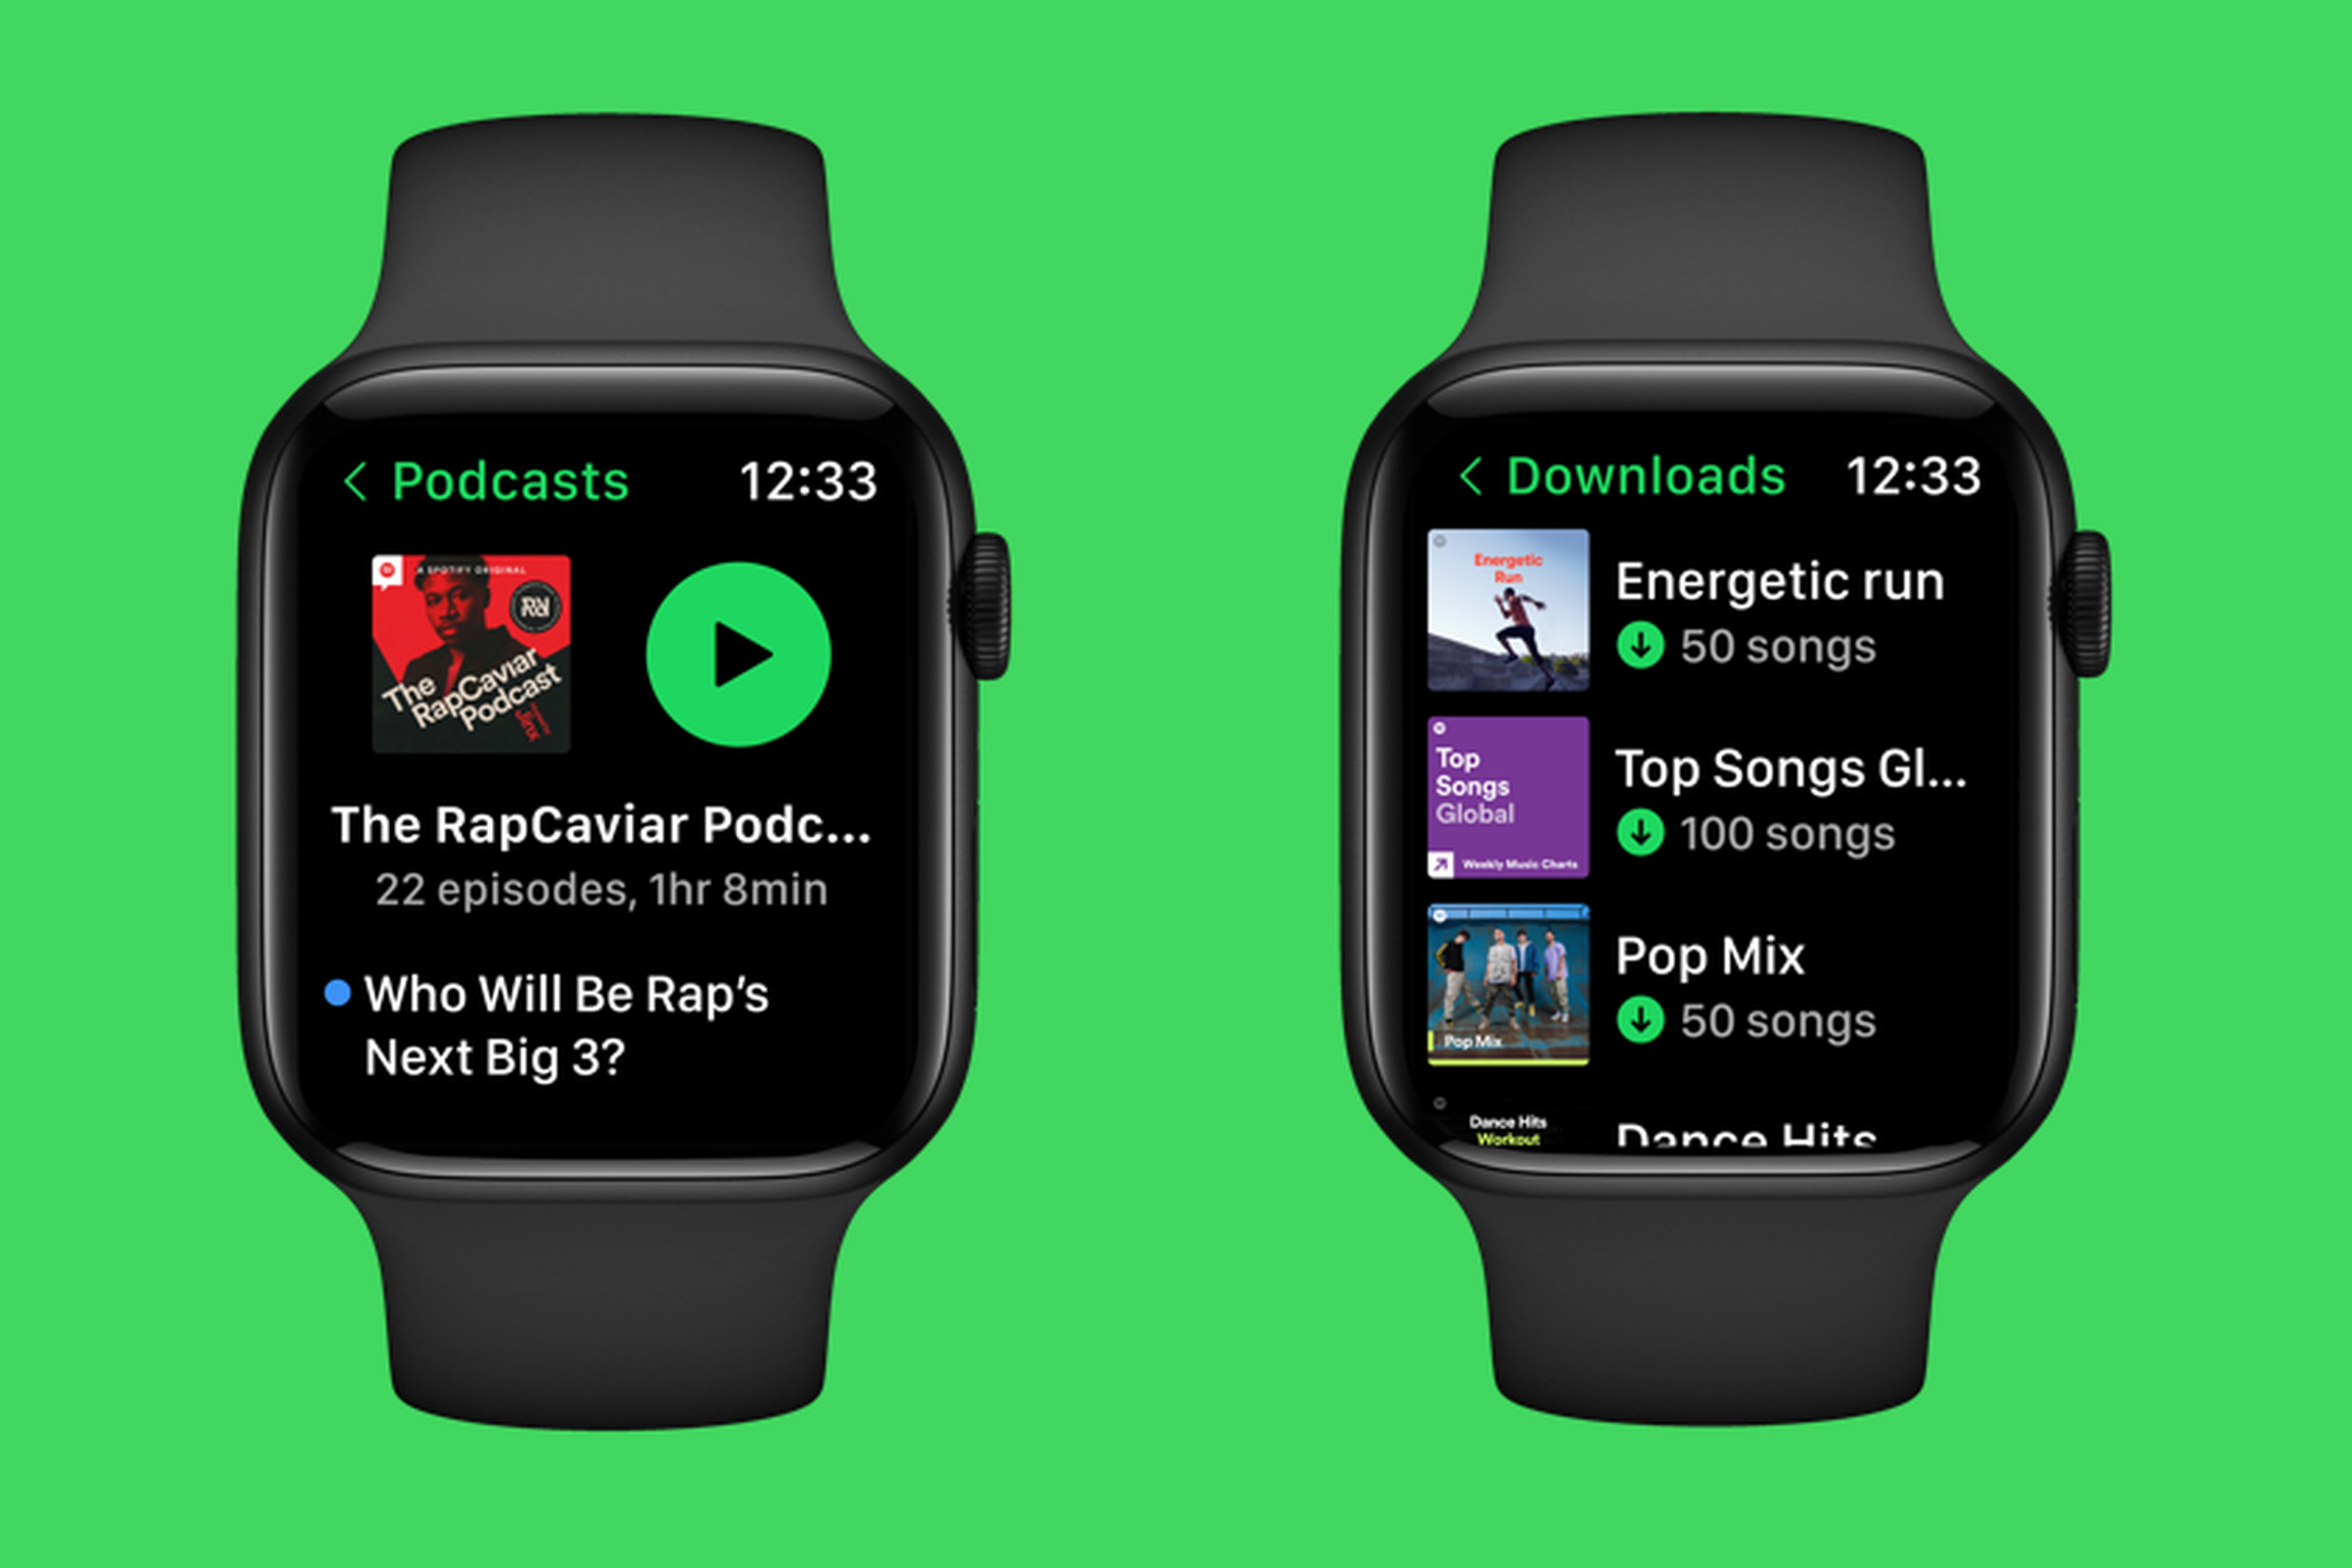 An image of Spotify’s redesigned Apple Watch app.